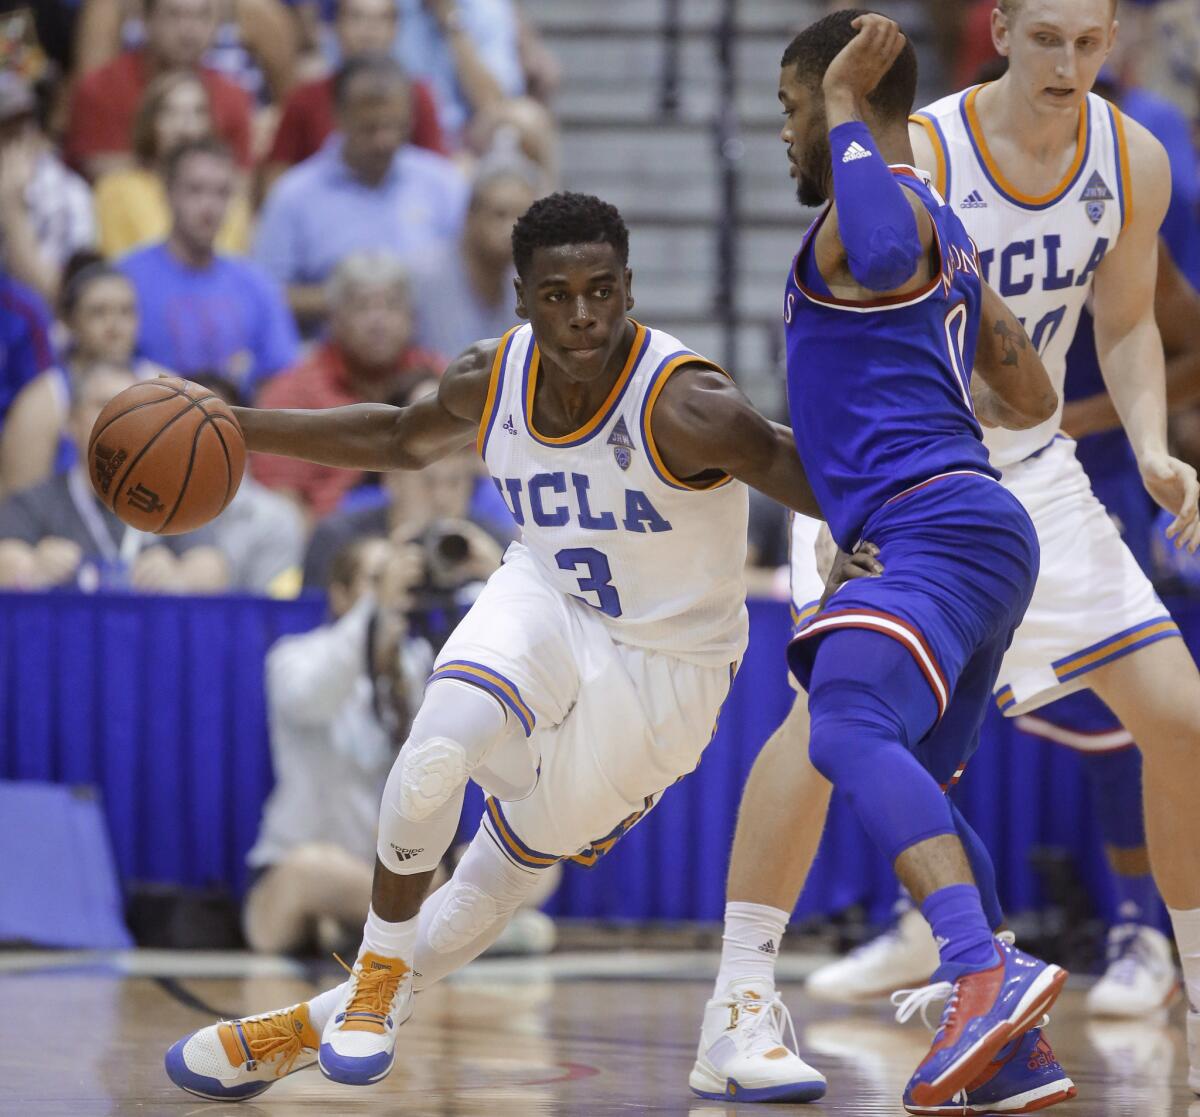 UCLA guard Aaron Holiday (3) drives around a Kansas defender during the first half of a game in the Maui Invitational.